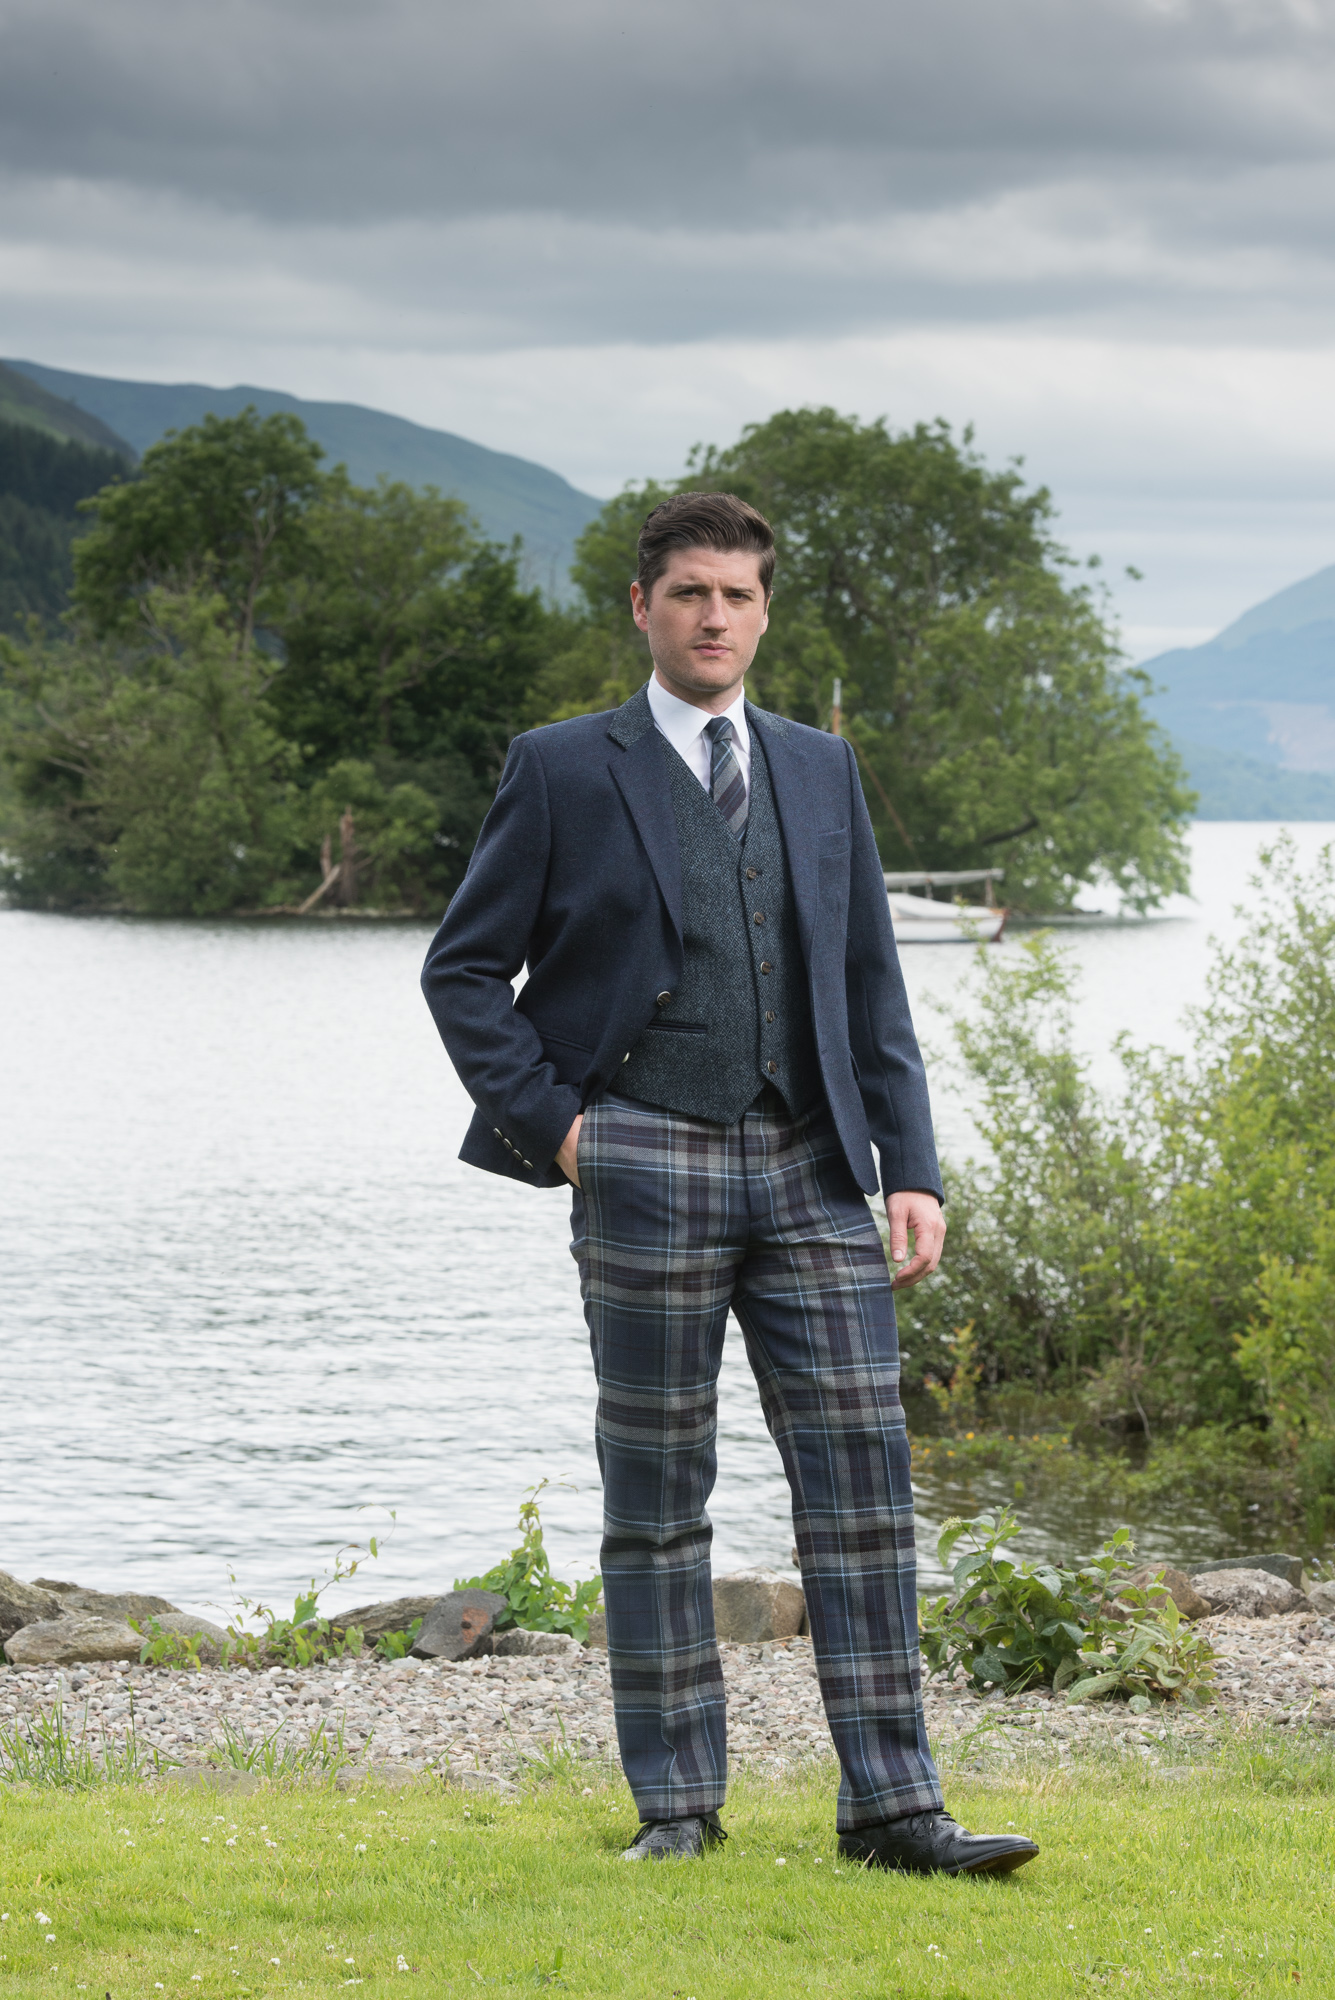 kilt outfits for sale and wedding packages | Kilts for men